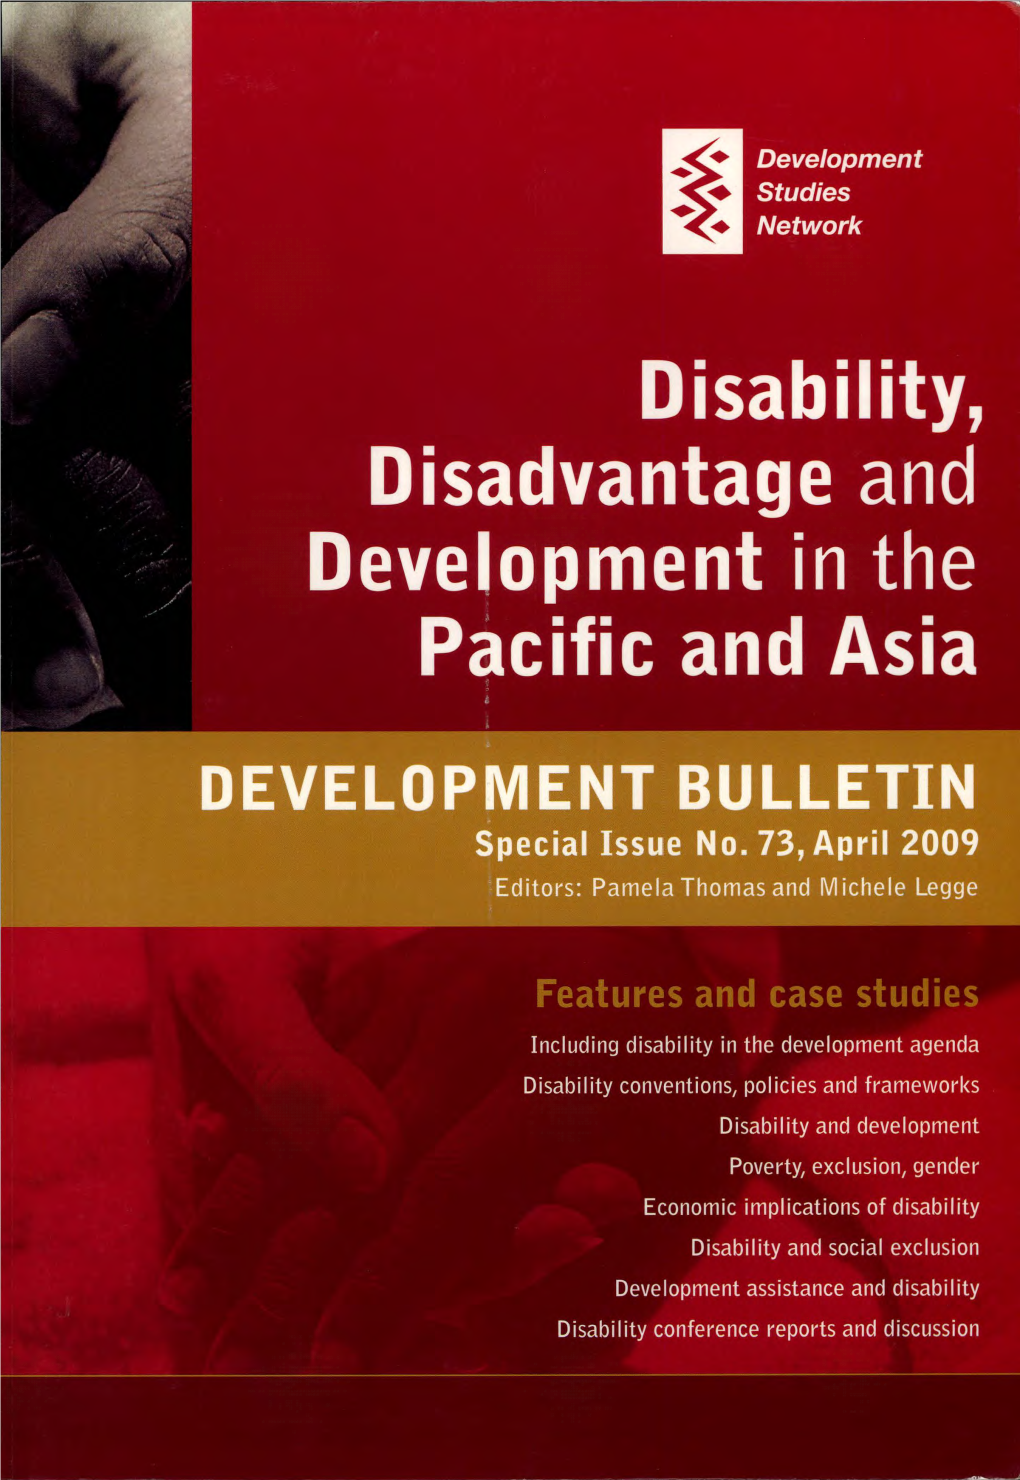 Disability, Disadvantage and Development in the Pacific and Asia